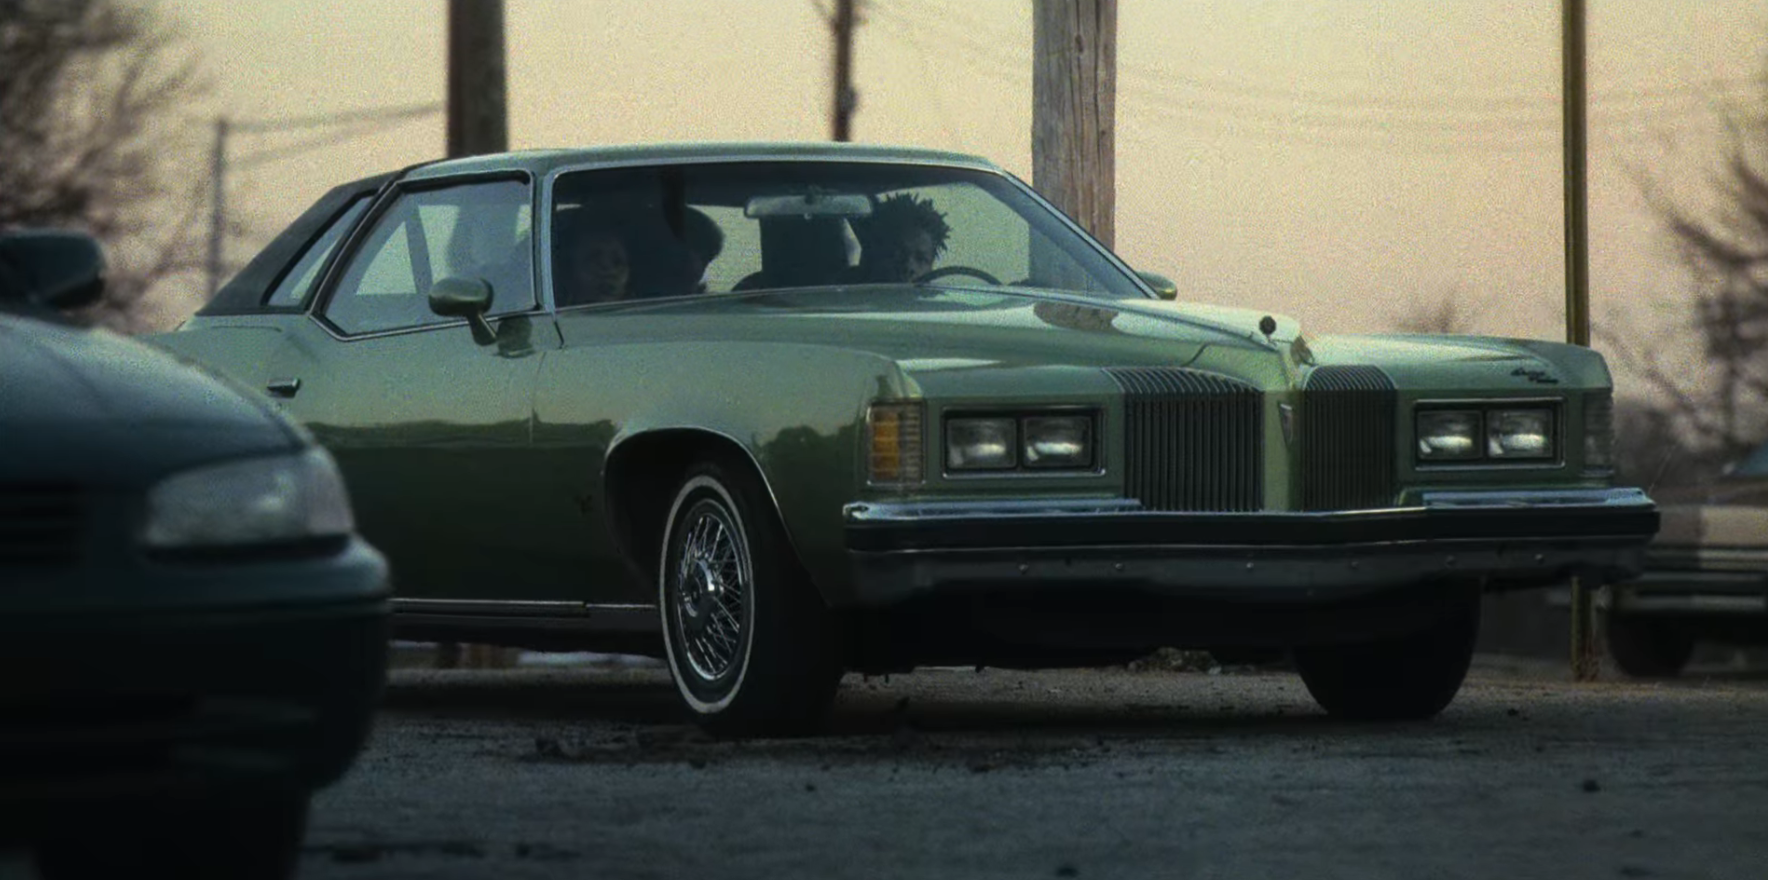 A vintage 1976 car stole the show in They Cloned Tyrone